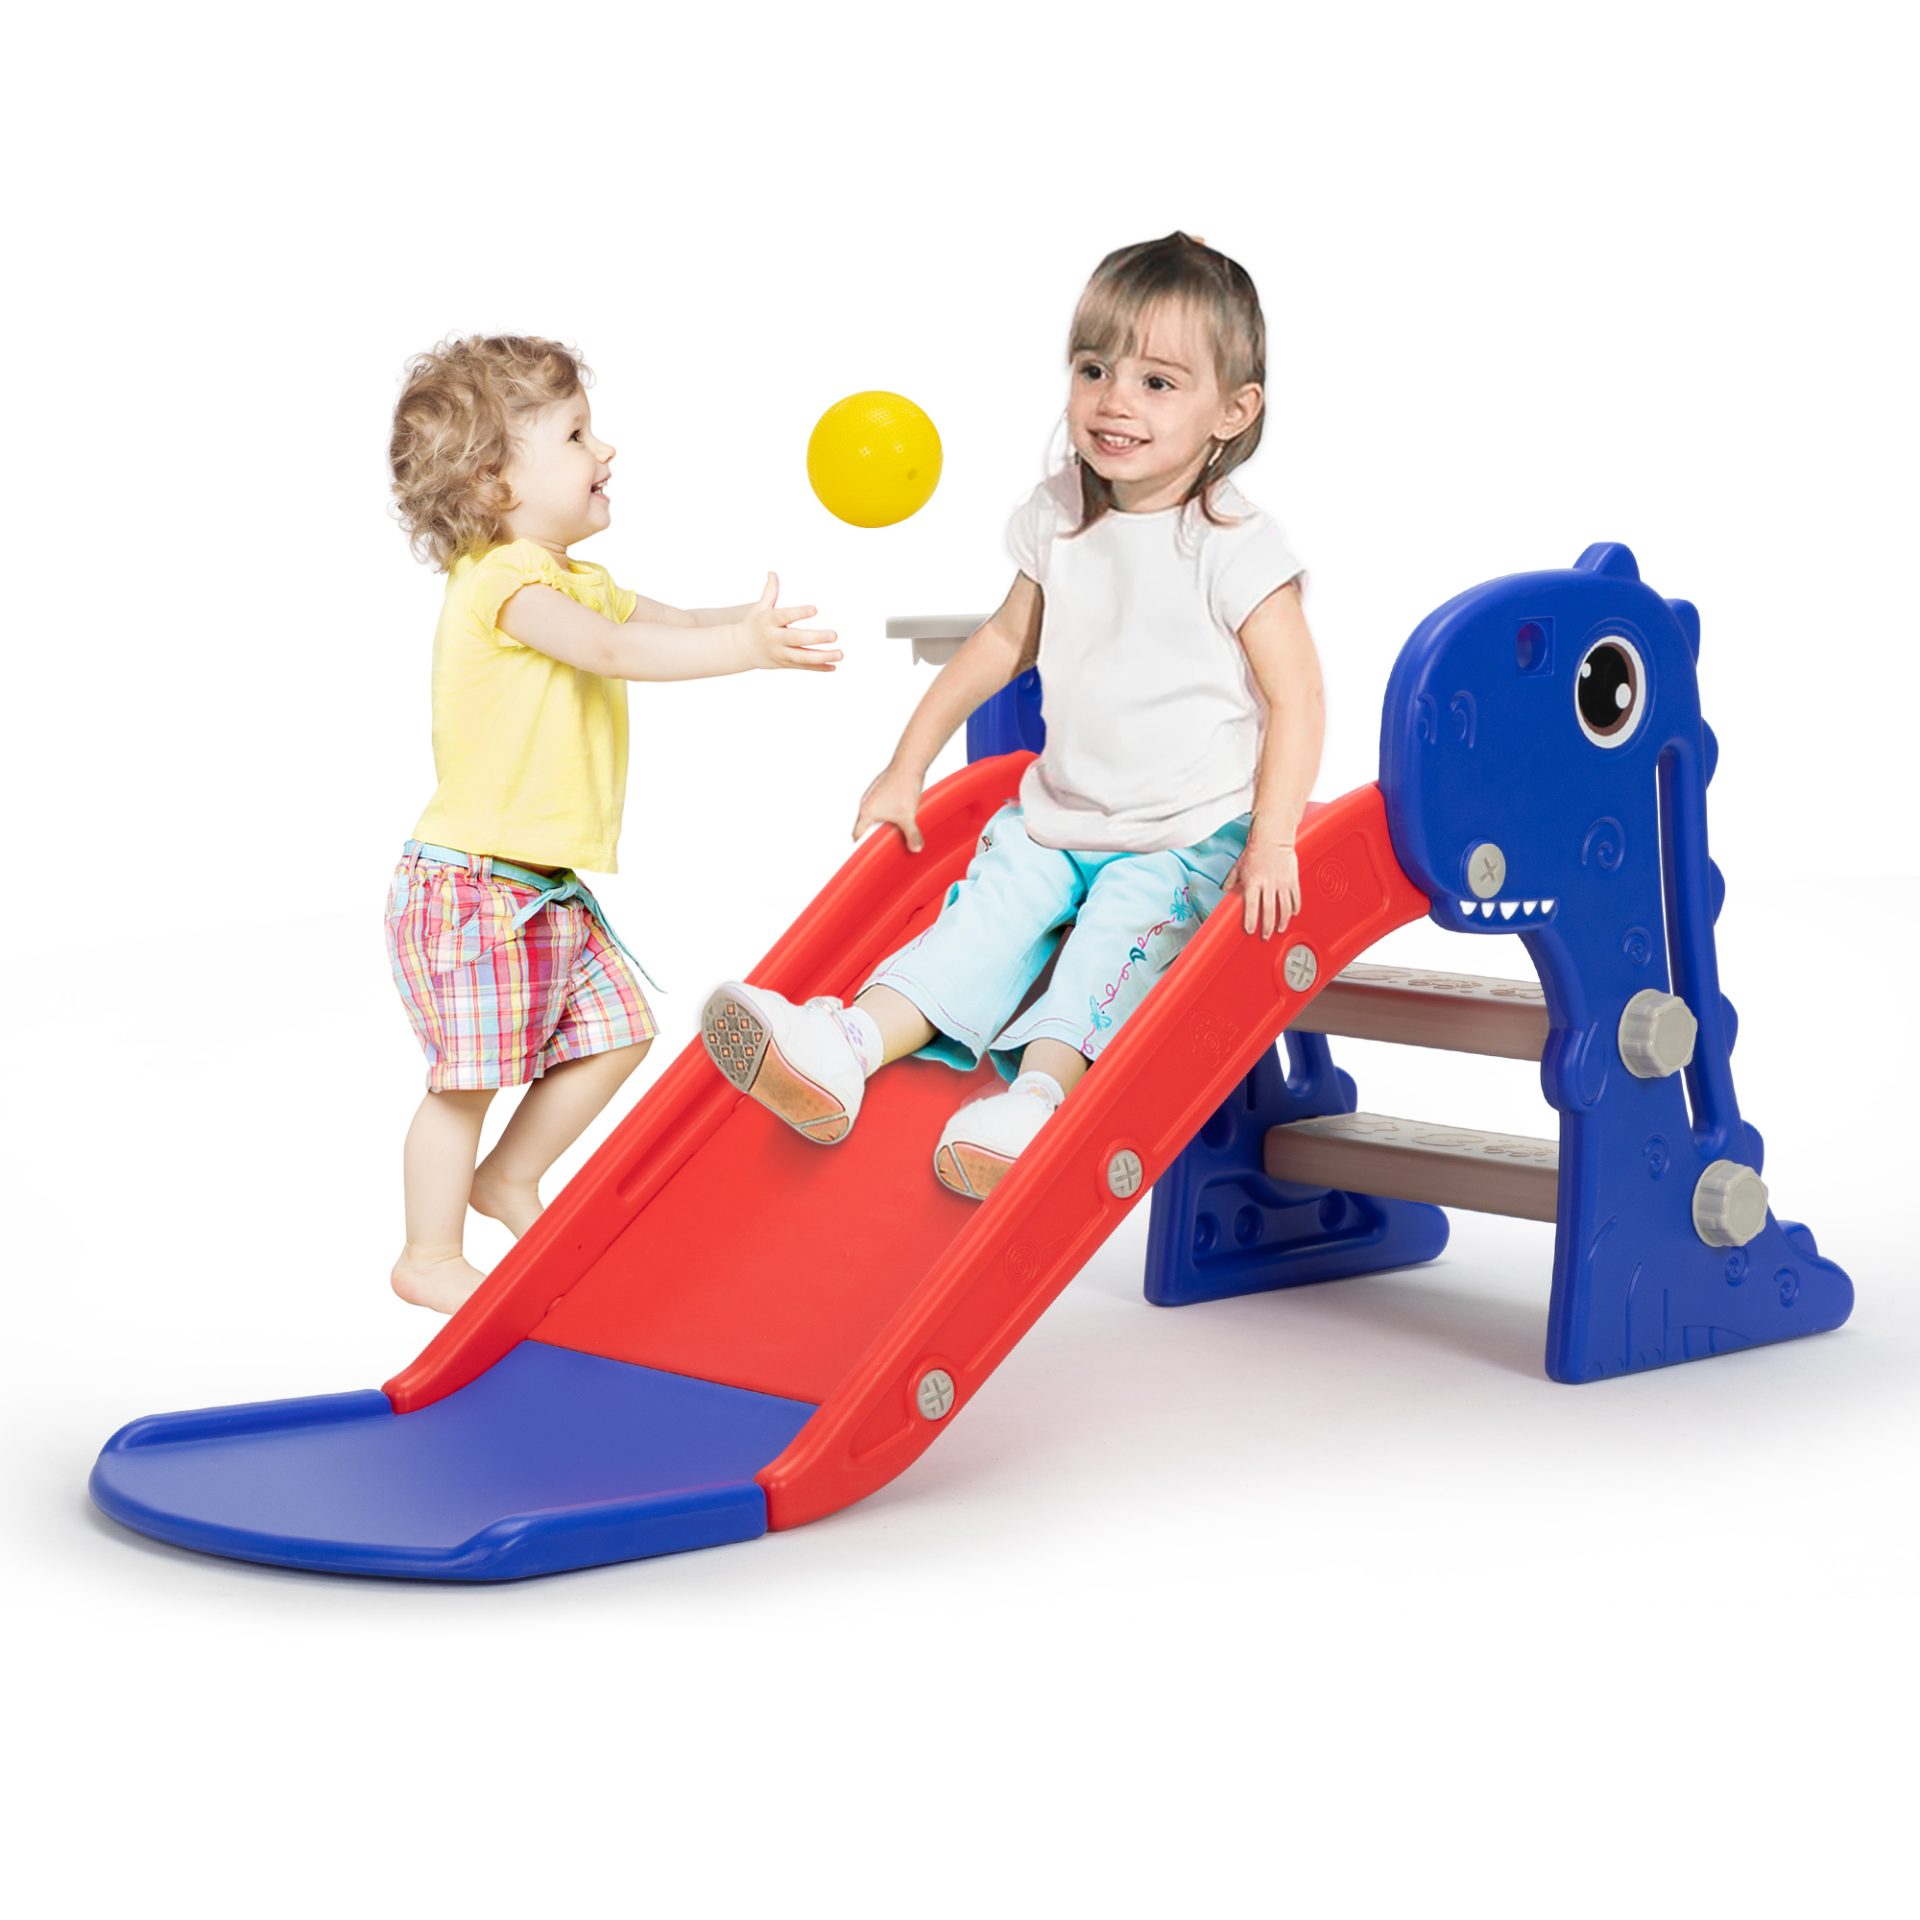 Nyeekoy 3 in 1 Toddler Slide Baby Slide Climber Playset with Basketball Hoop and Ball, Indoor and Outdoor Playground for Kids,Blue TH17X0983